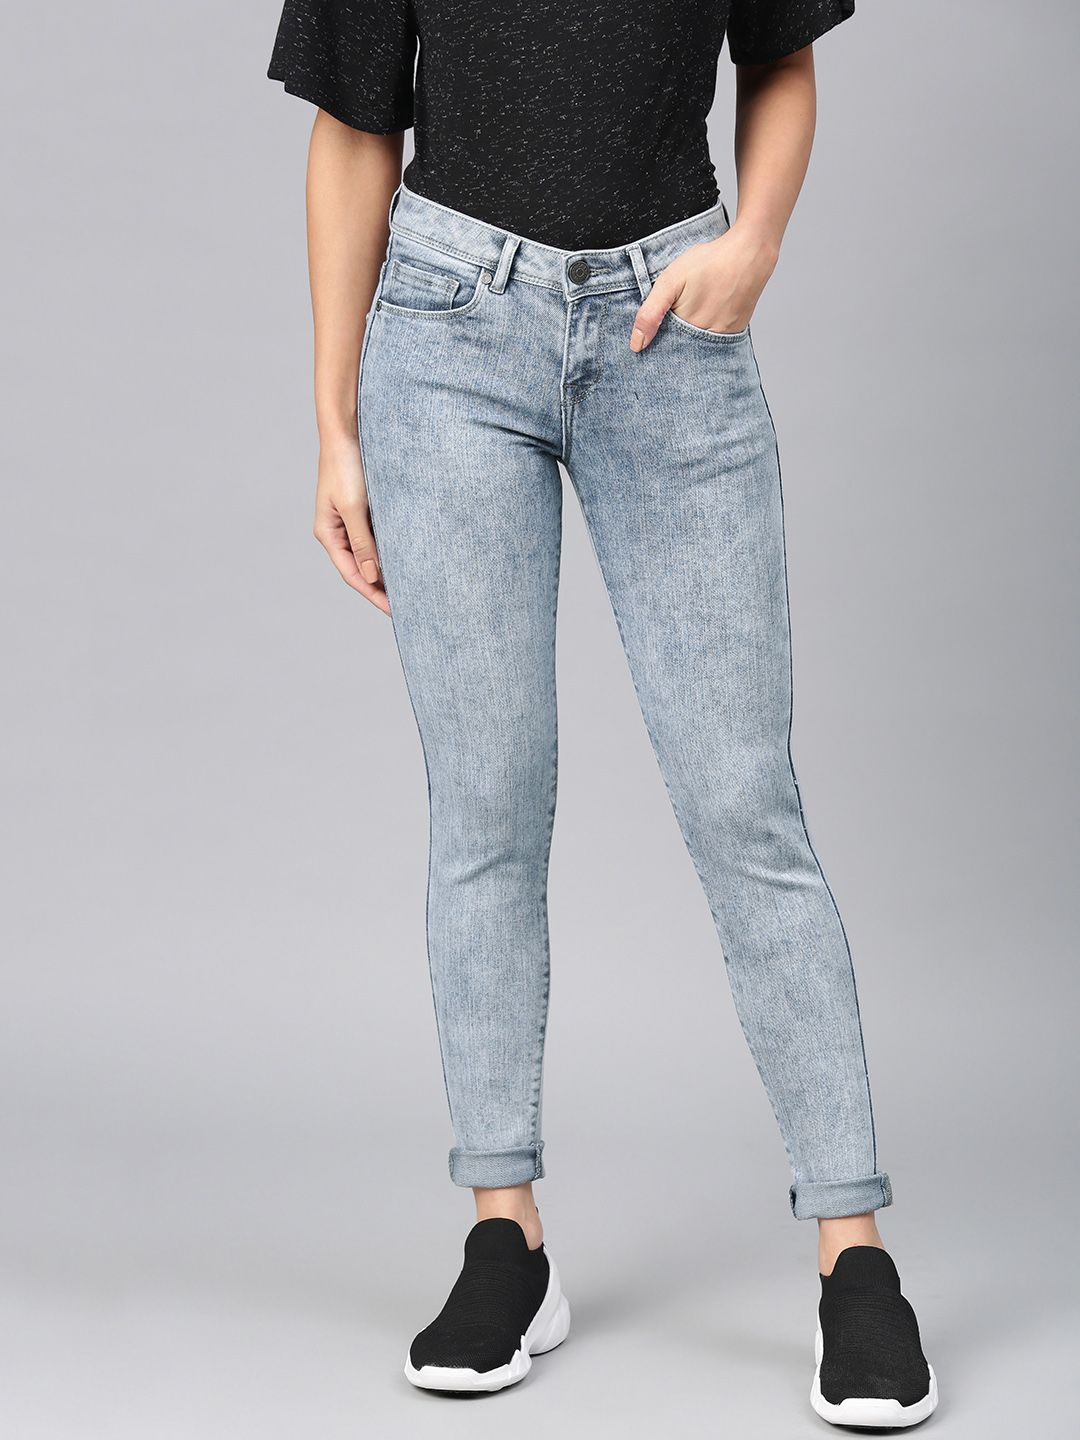 American Crew Women Blue Slim Fit Mid-Rise Clean Look Stretchable Jeans Price in India